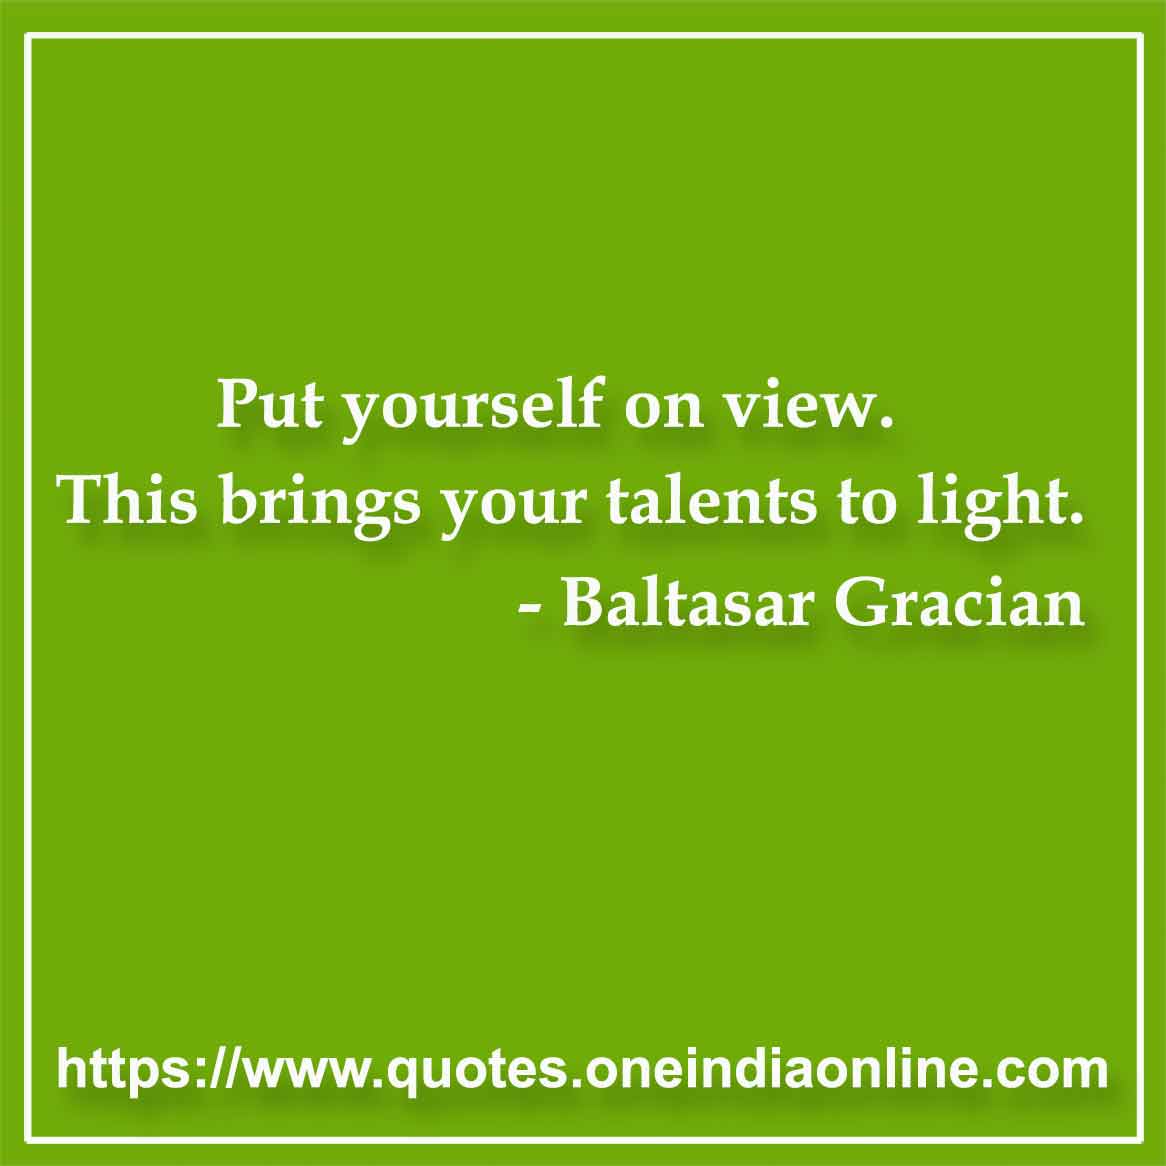 Put yourself on view. This brings your talents to light.

- Put yourself on view Quotes by Baltasar Gracian 